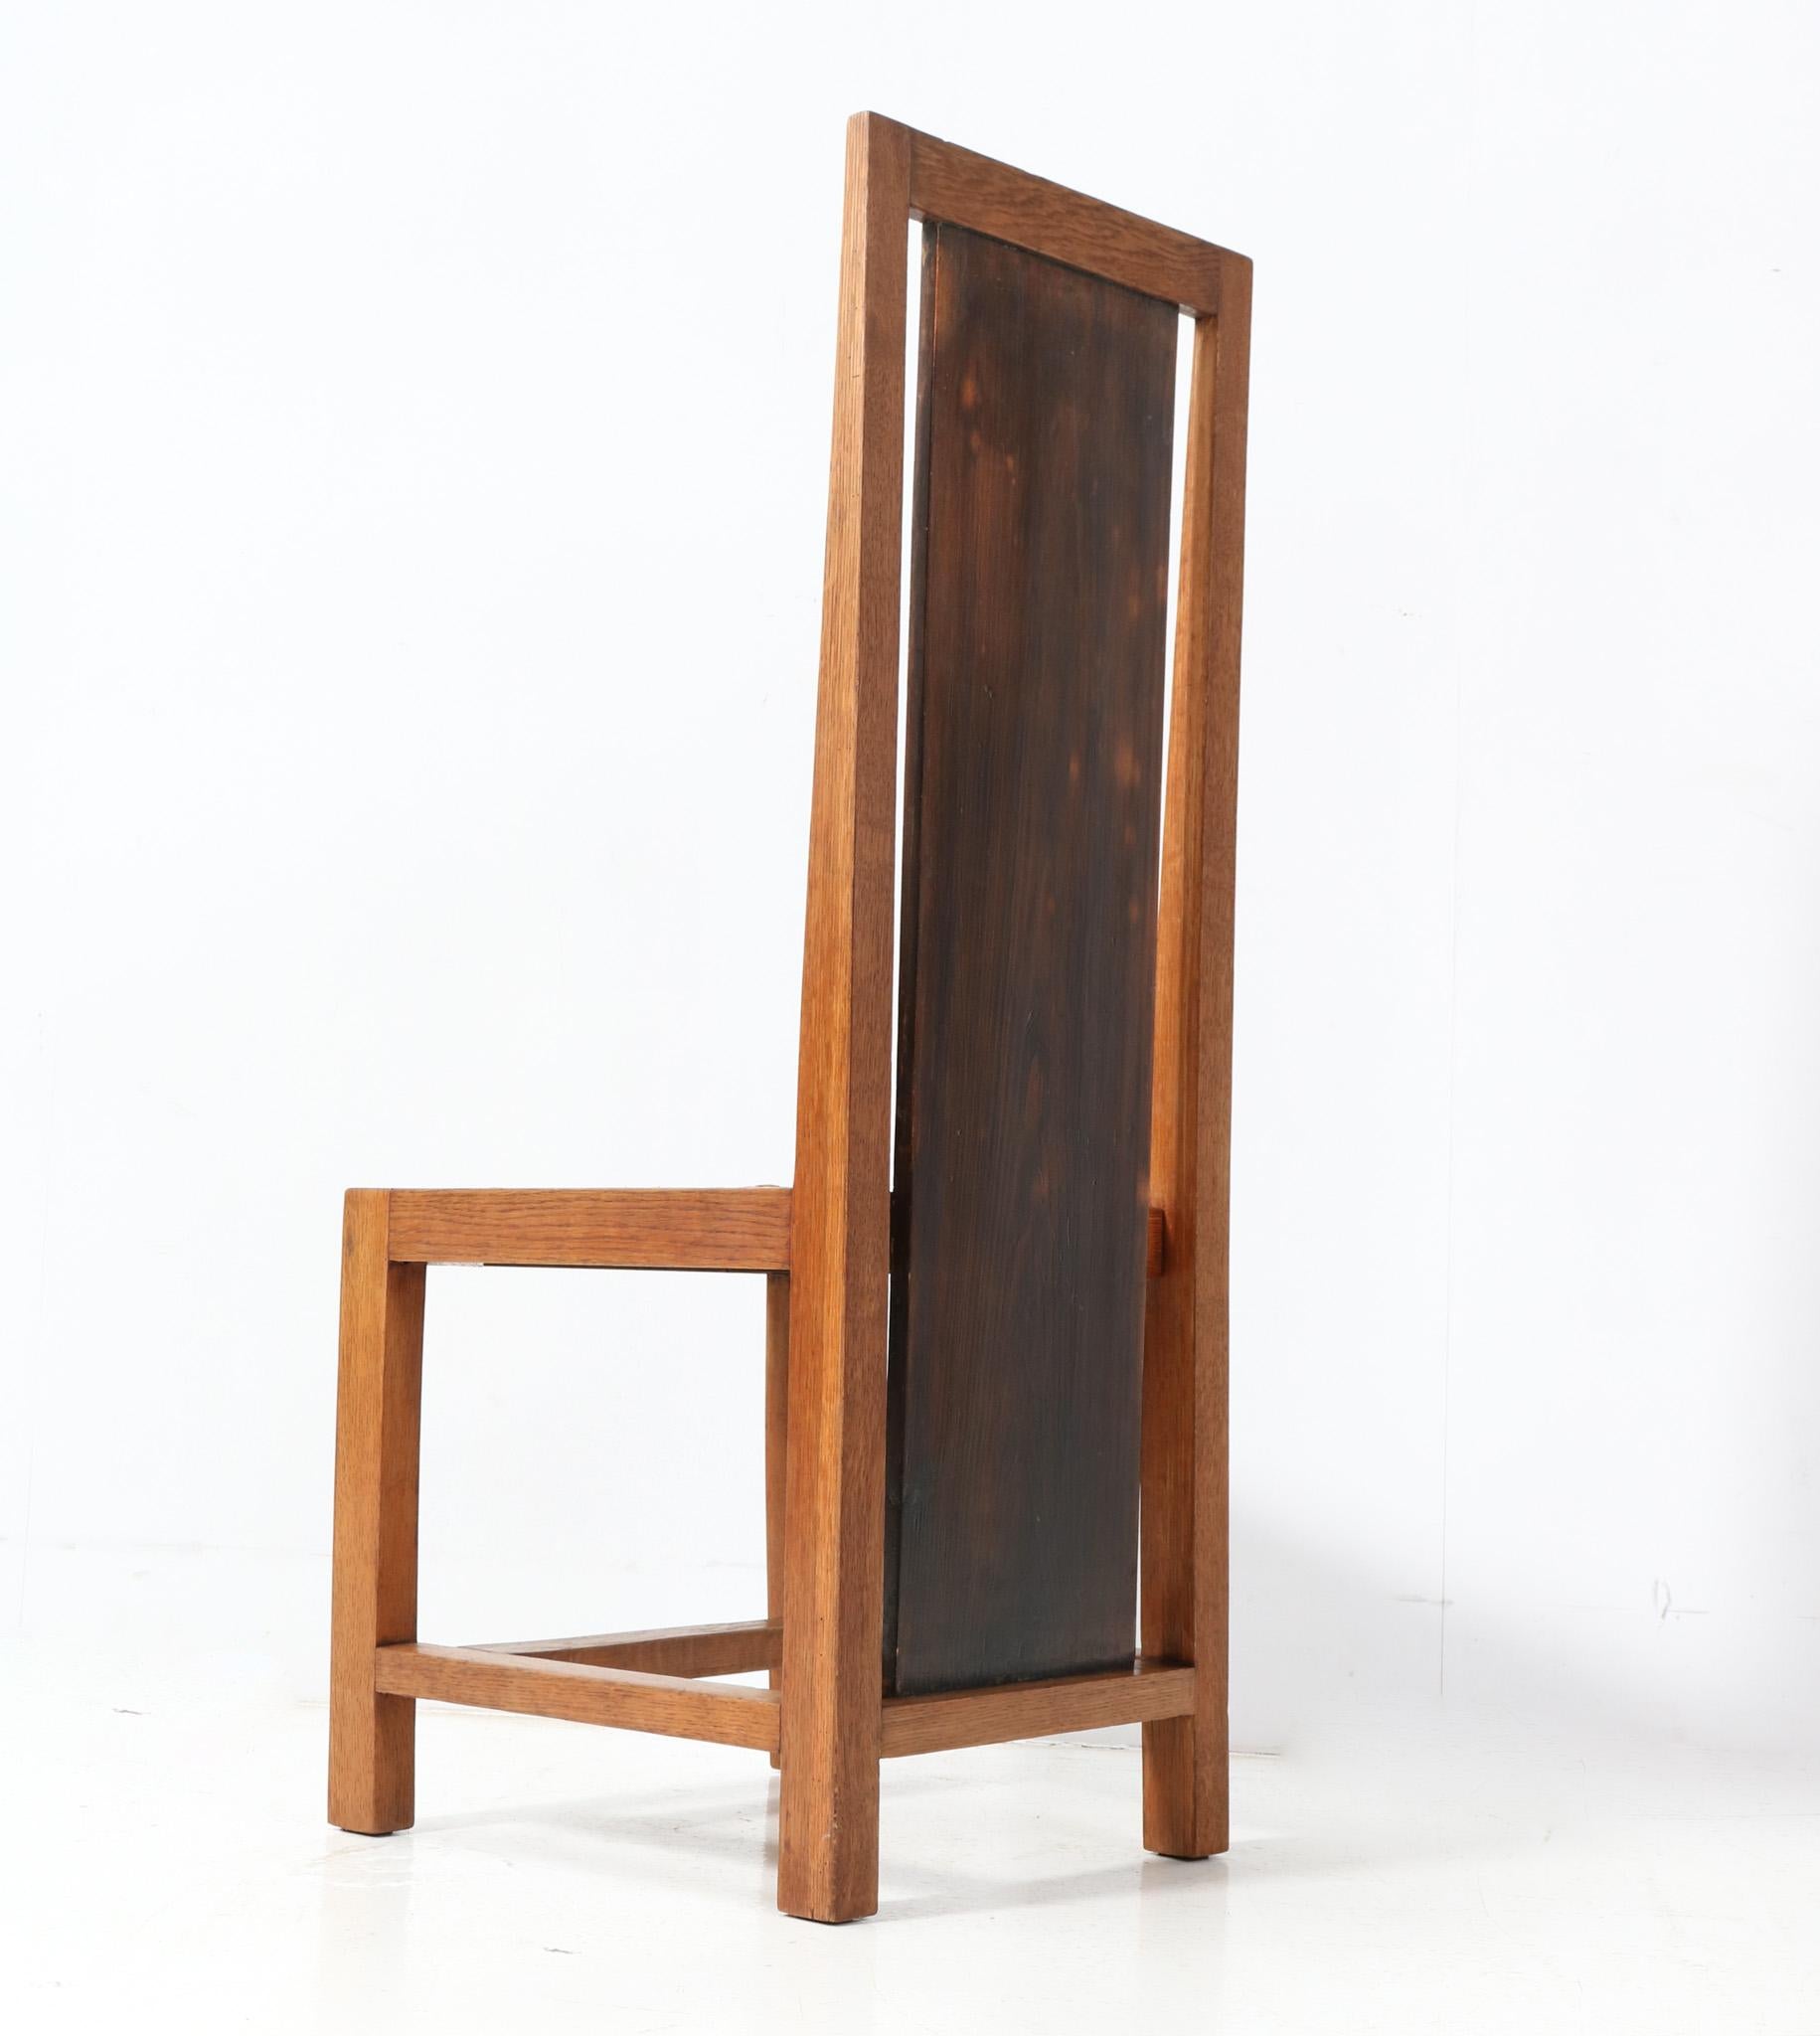  Art Deco Modernist Oak High Back Chair by Cor Alons, 1923 For Sale 1